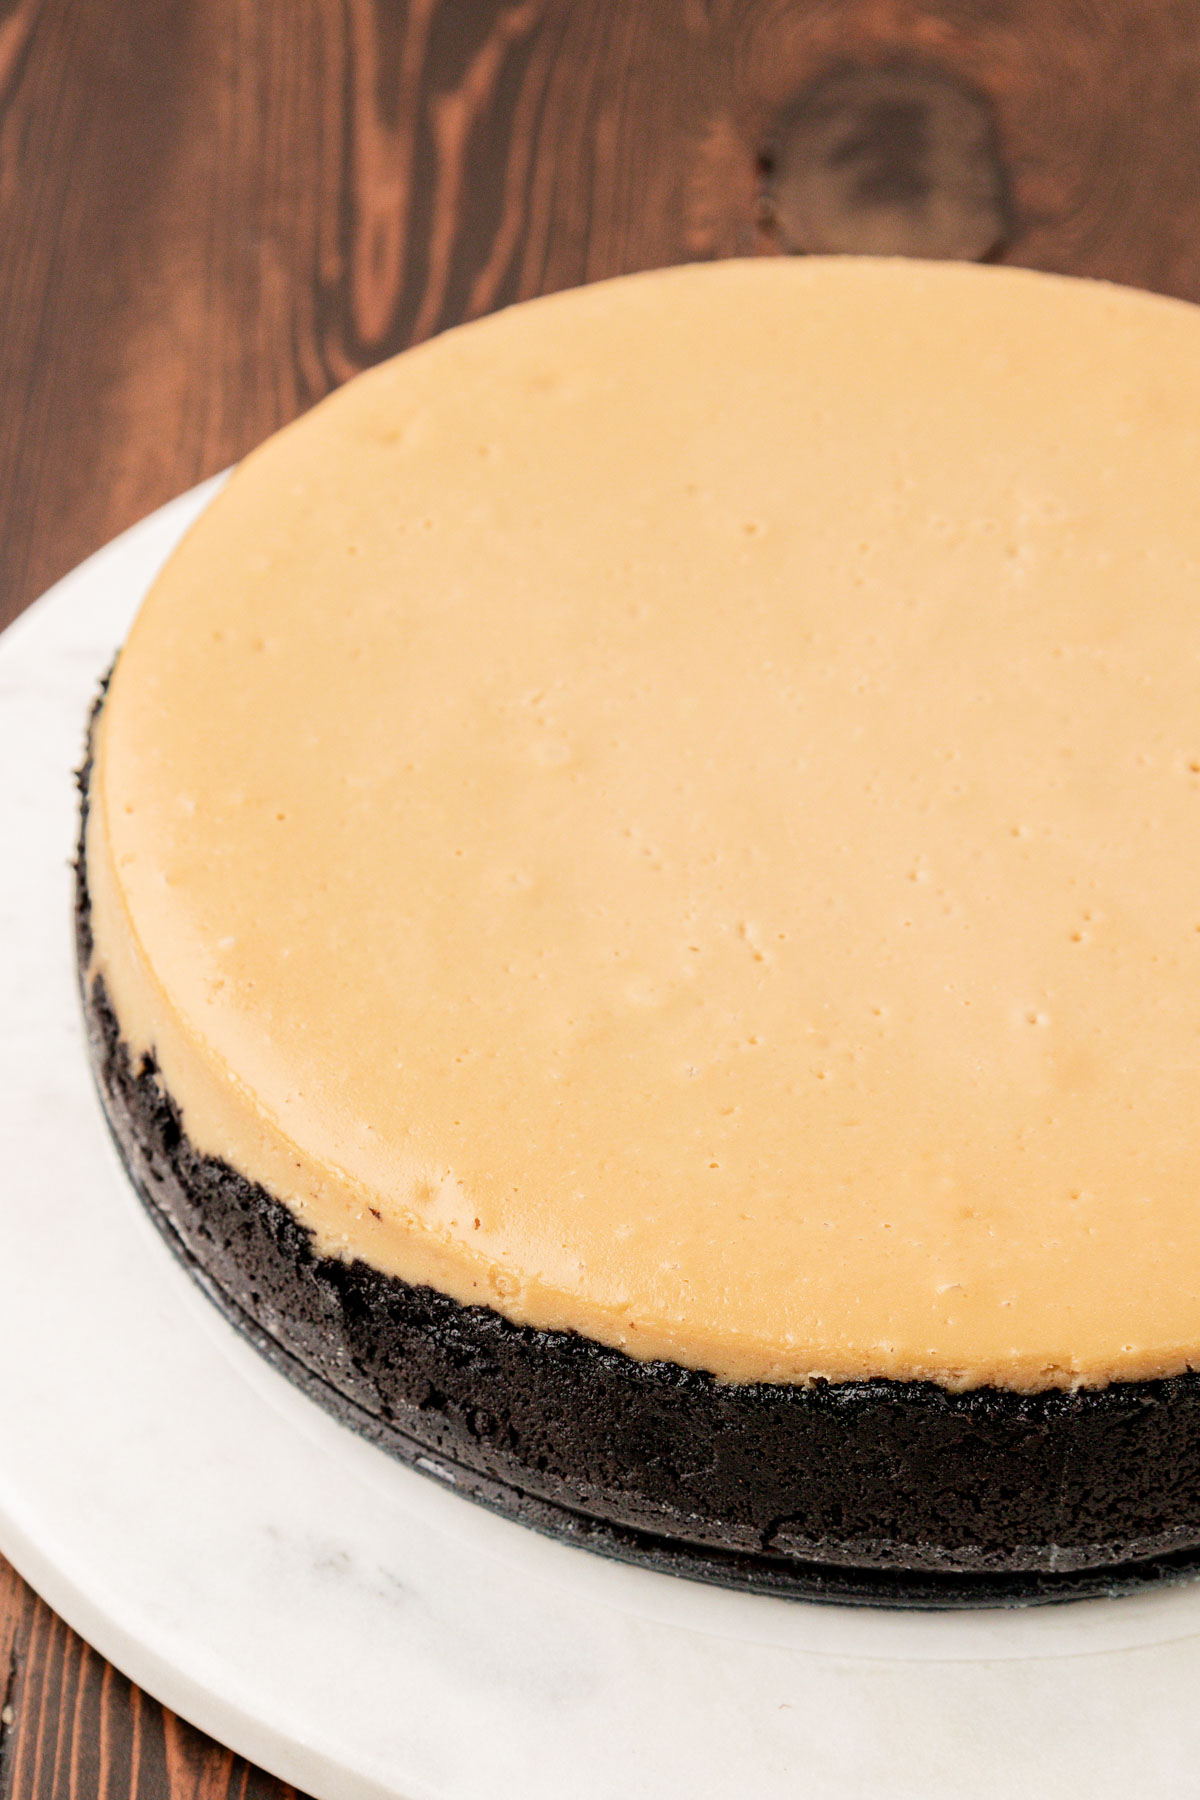 A coffee cheesecake on a white cake stand ready to be topped.